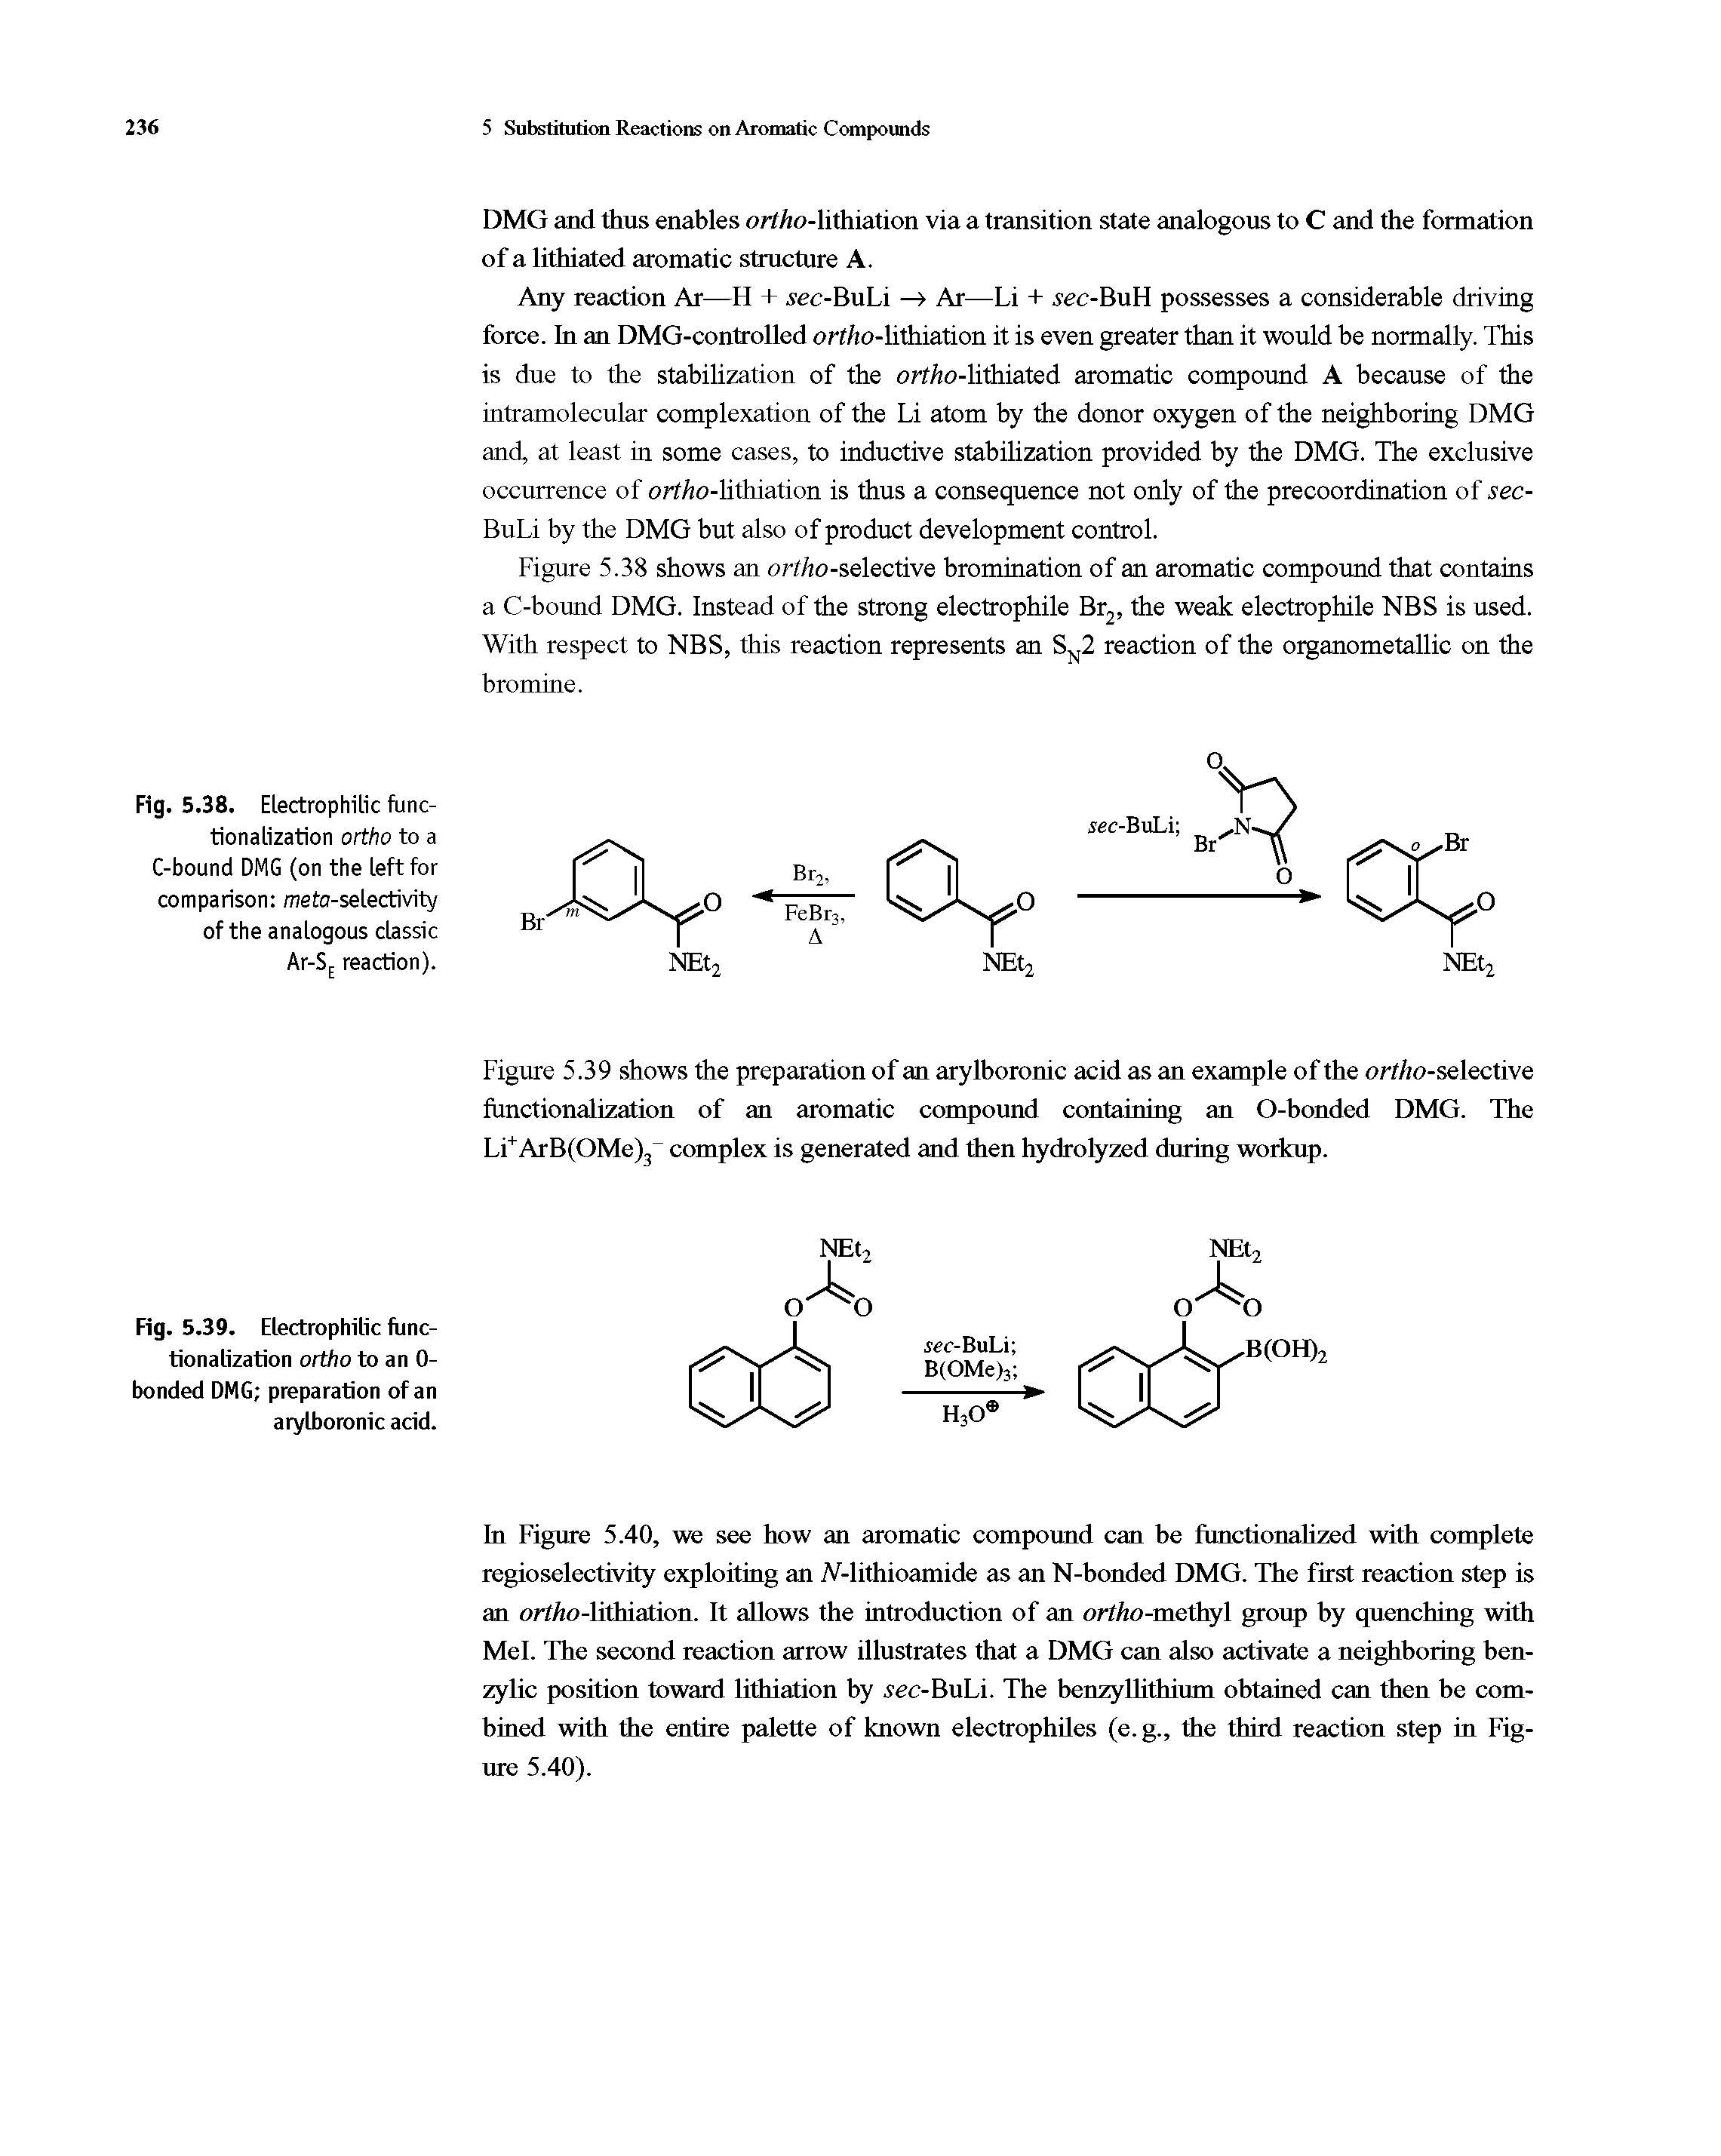 Fig. 5.38. Electrophilic functionalization ortho to a C-bound DMG (on the left for comparison meta-selectivity of the analogous classic Ar-SE reaction).